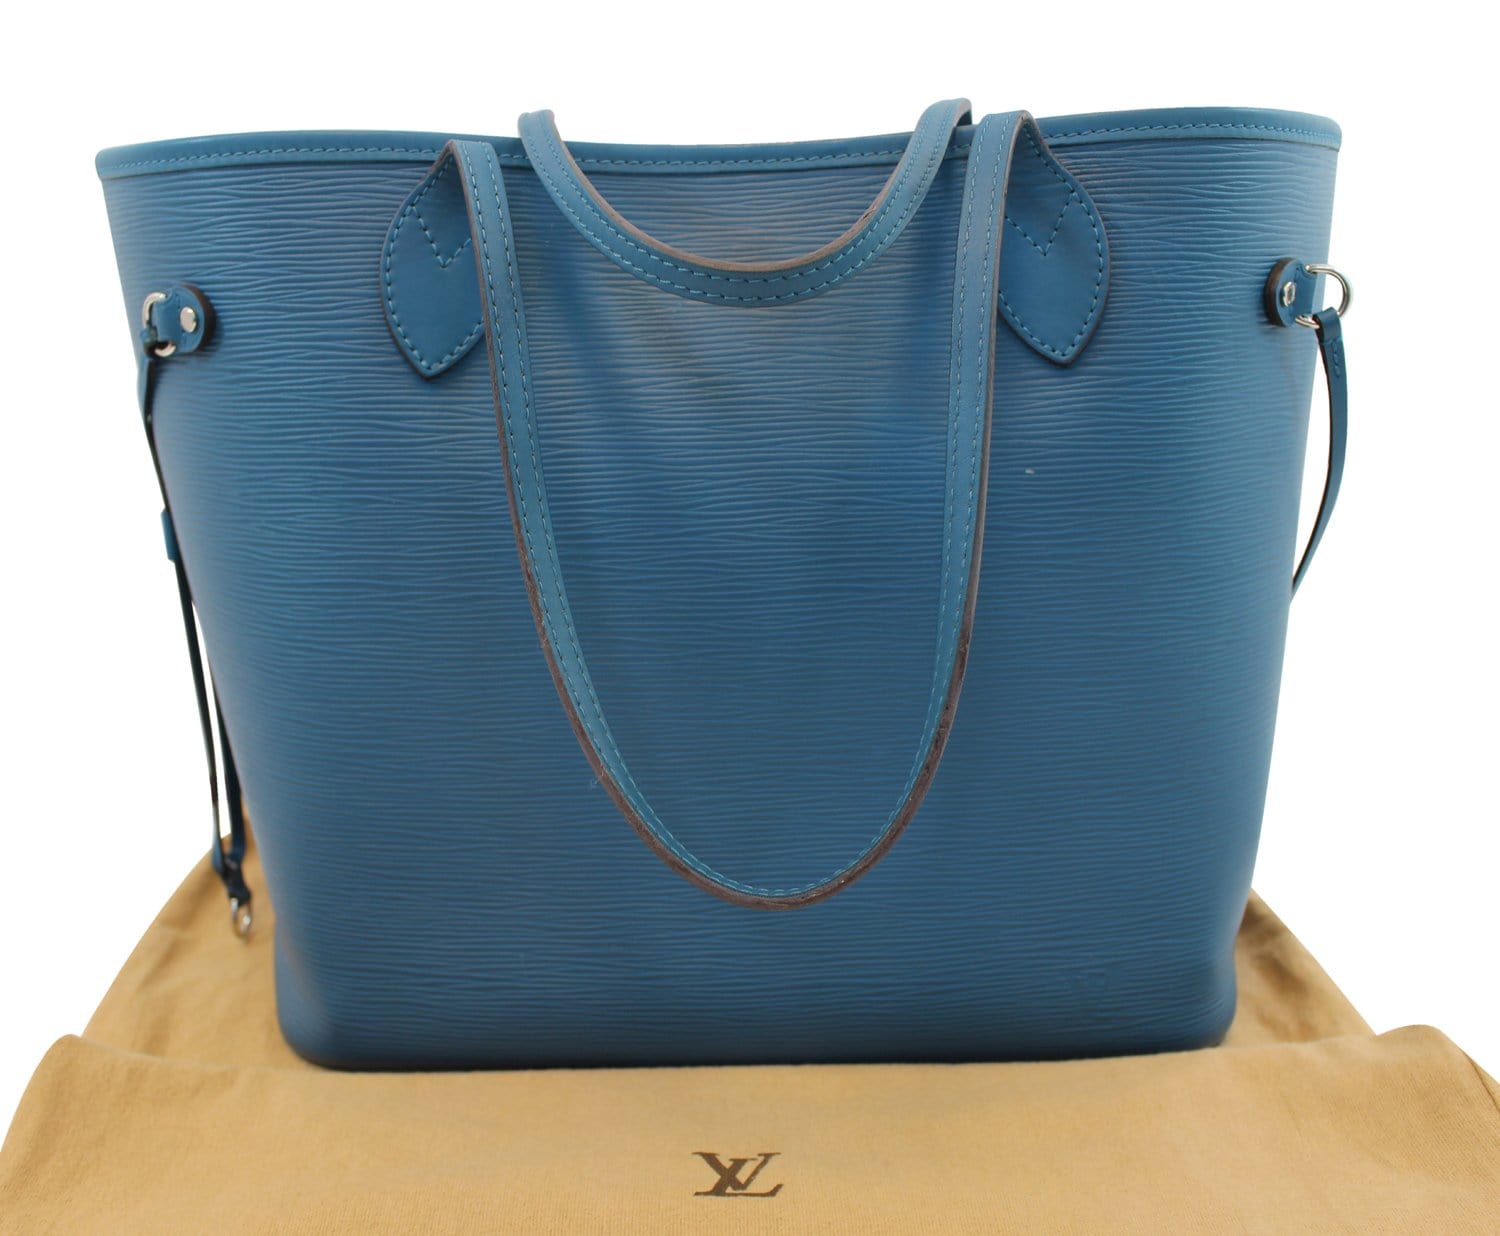 Louis Vuitton - Authenticated Neverfull Handbag - Leather Blue Plain for Women, Very Good Condition